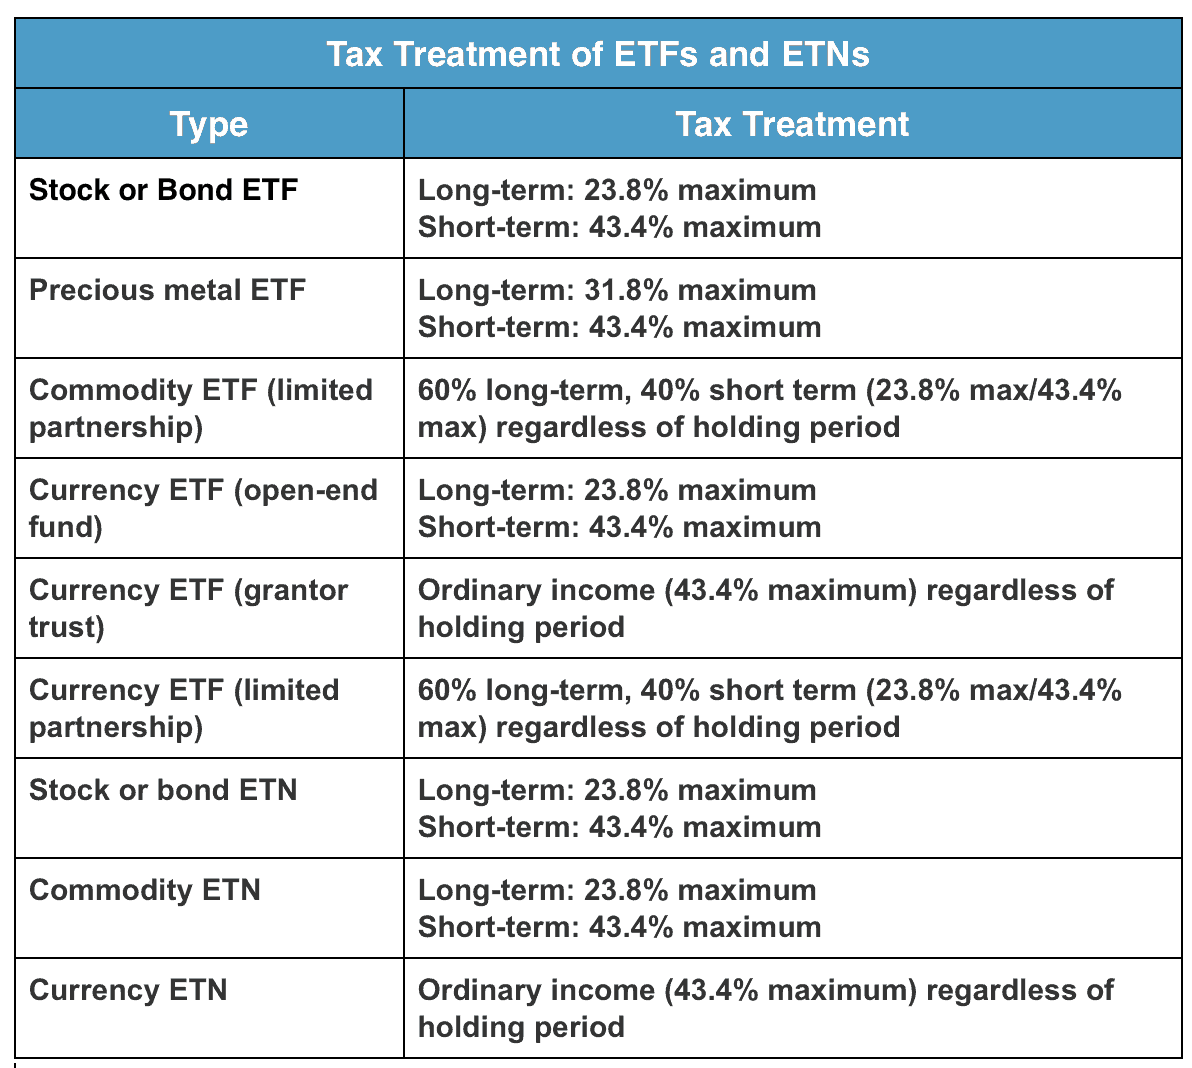 The difference between ETF's and ETN's tax treatment and